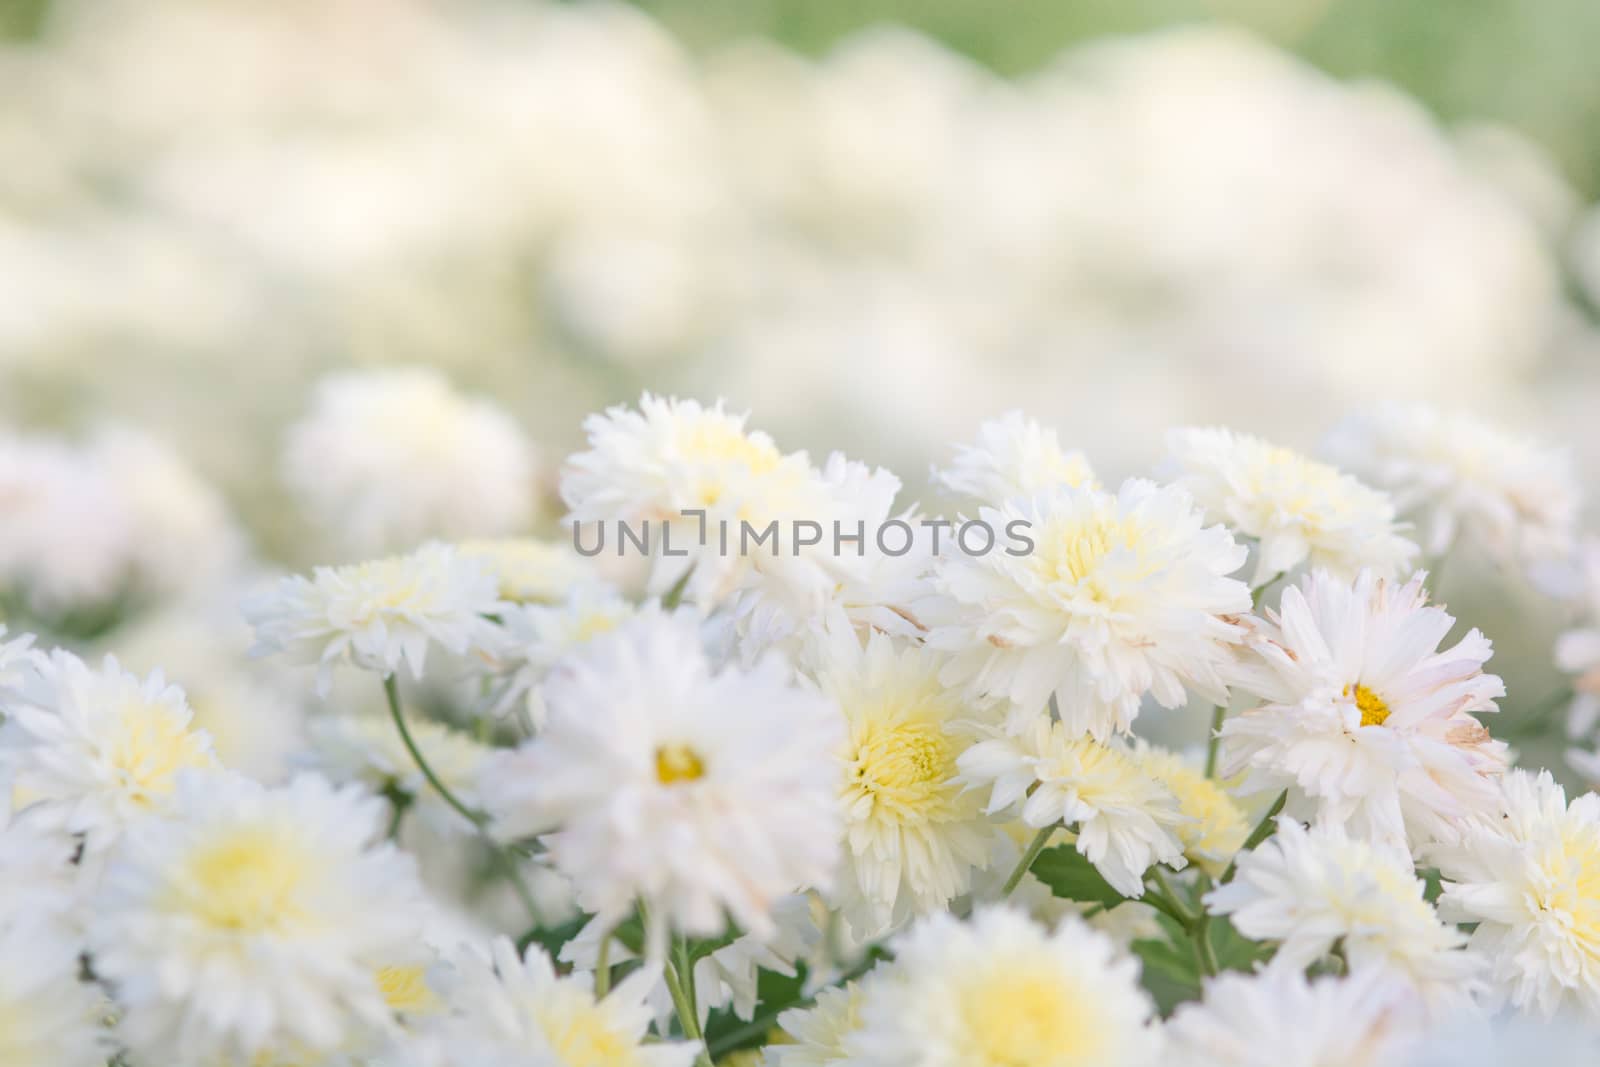 white chrysanthemum flowers, chrysanthemum in the garden. Blurry flower for background, colorful plants
